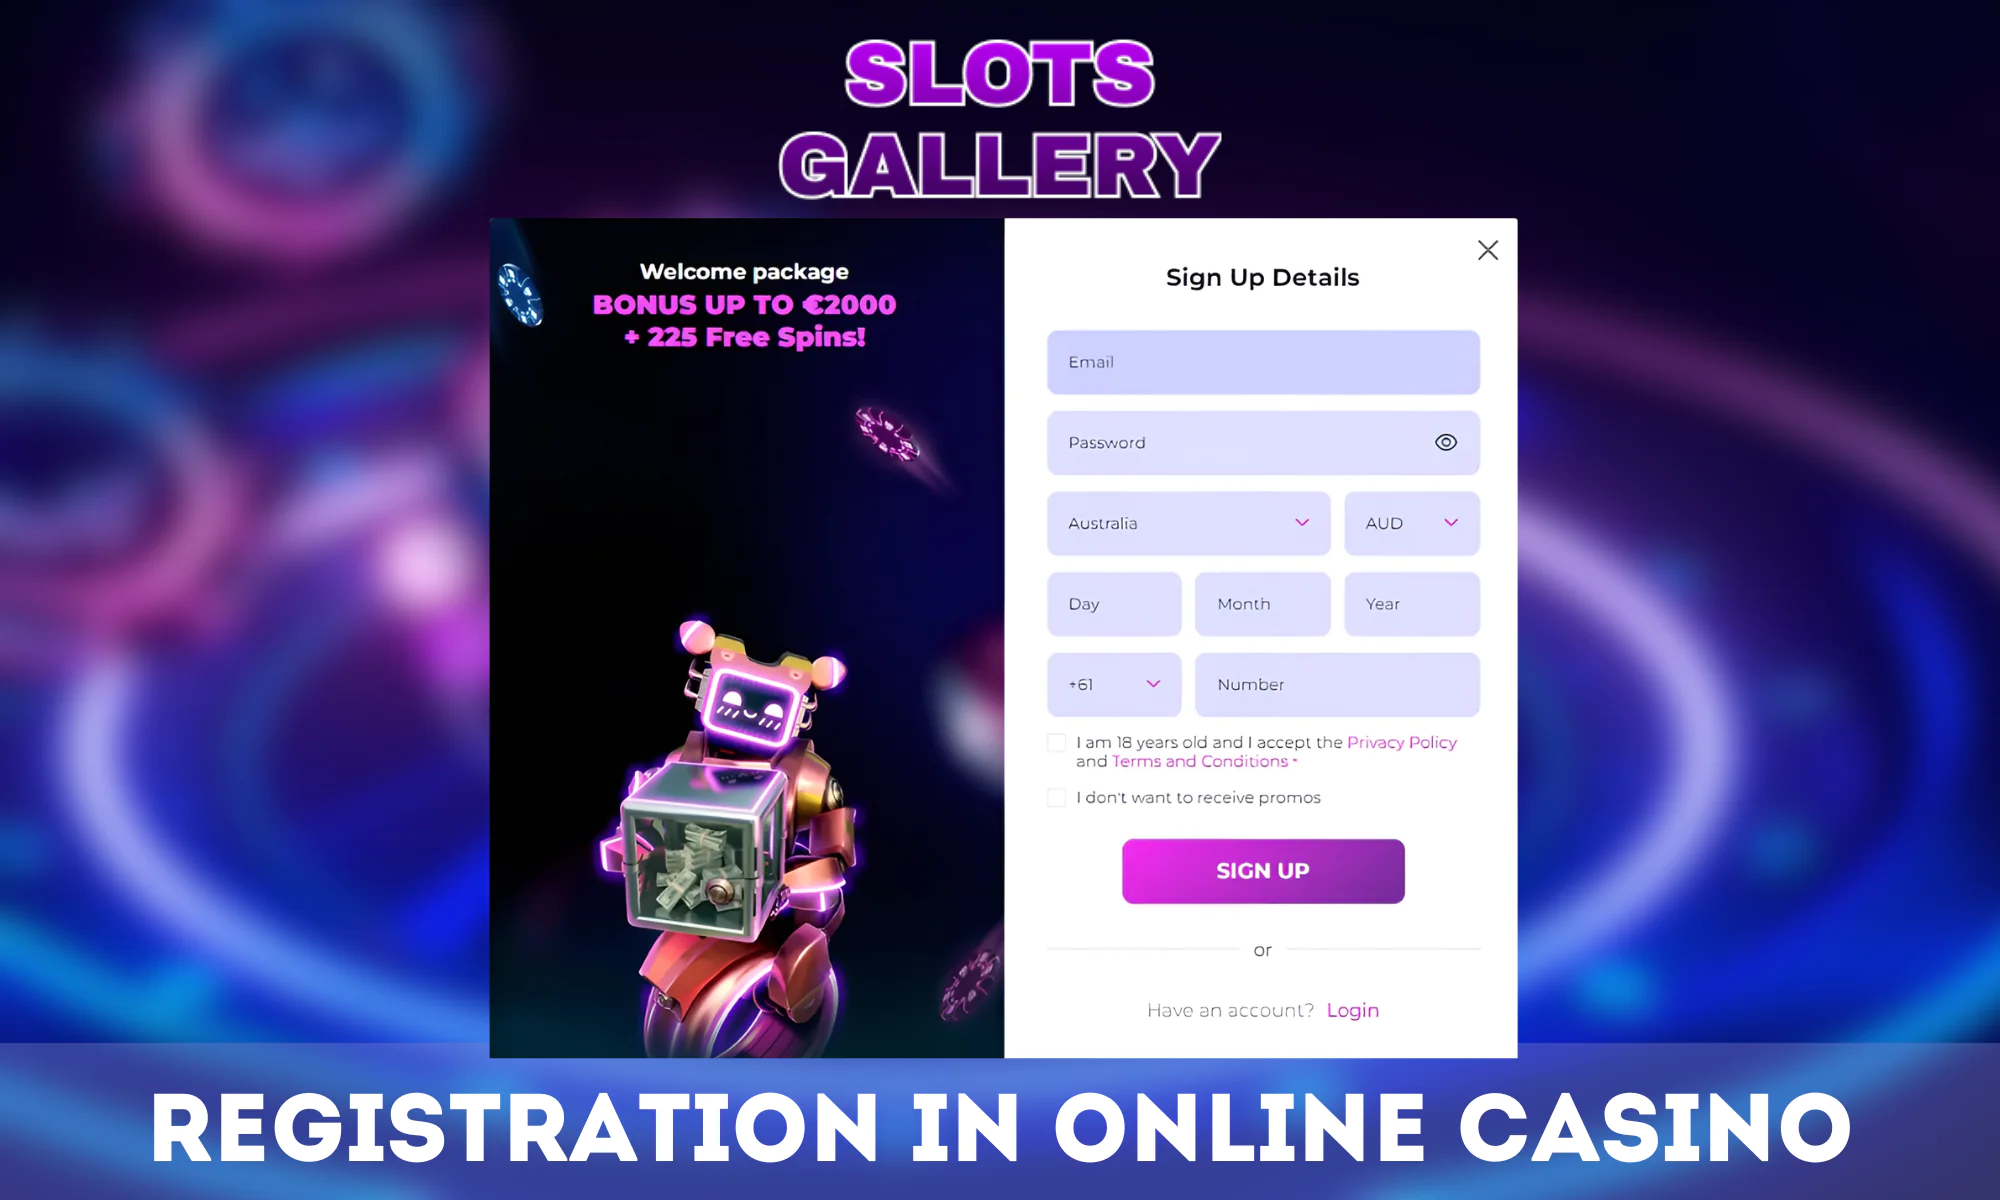 Steps to register on the Slots Gallery website in New Zealand